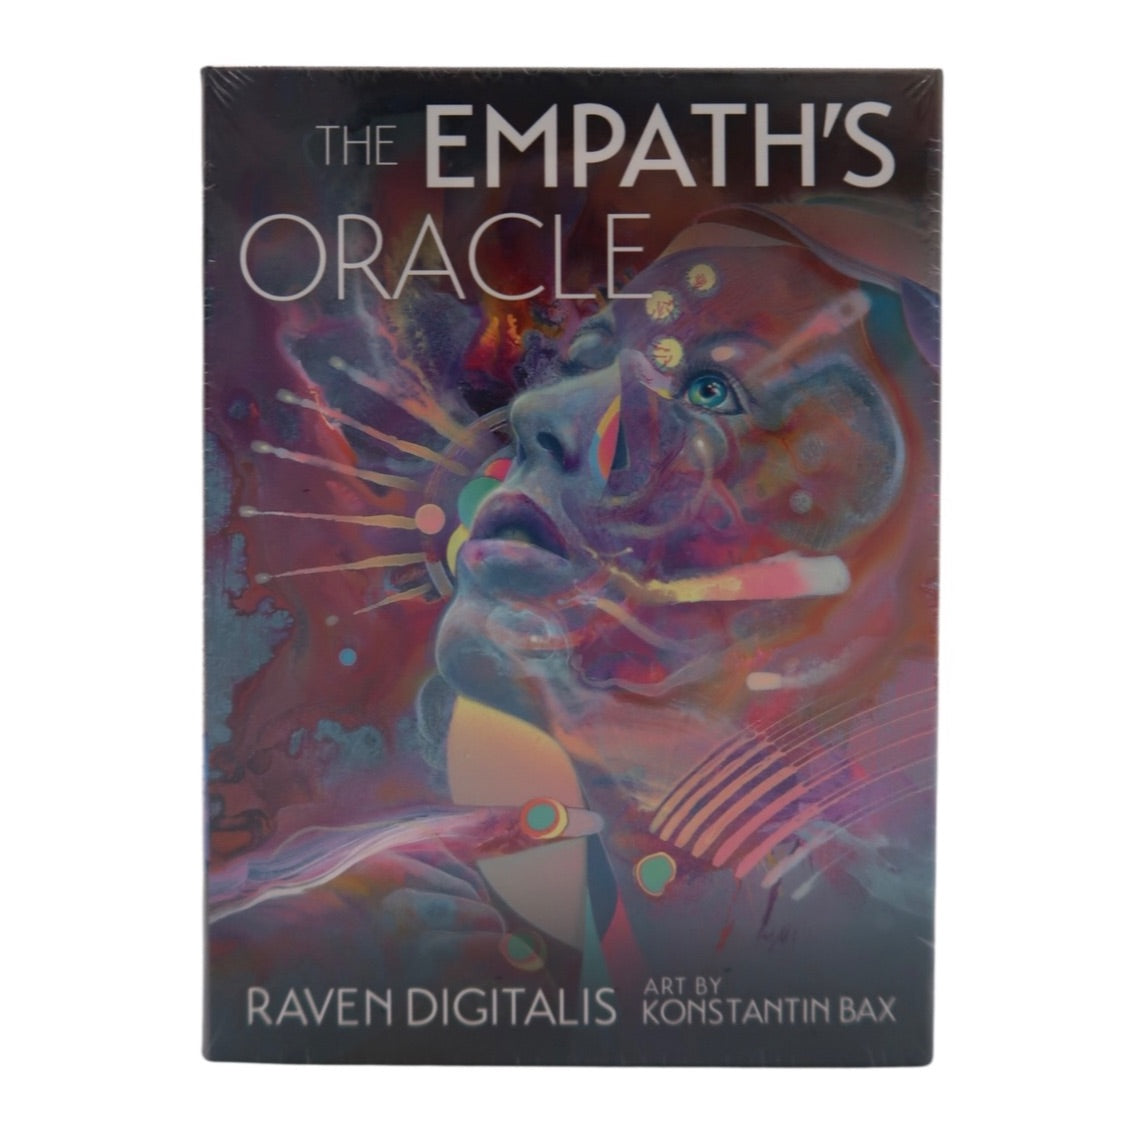 The Empaths Oracle